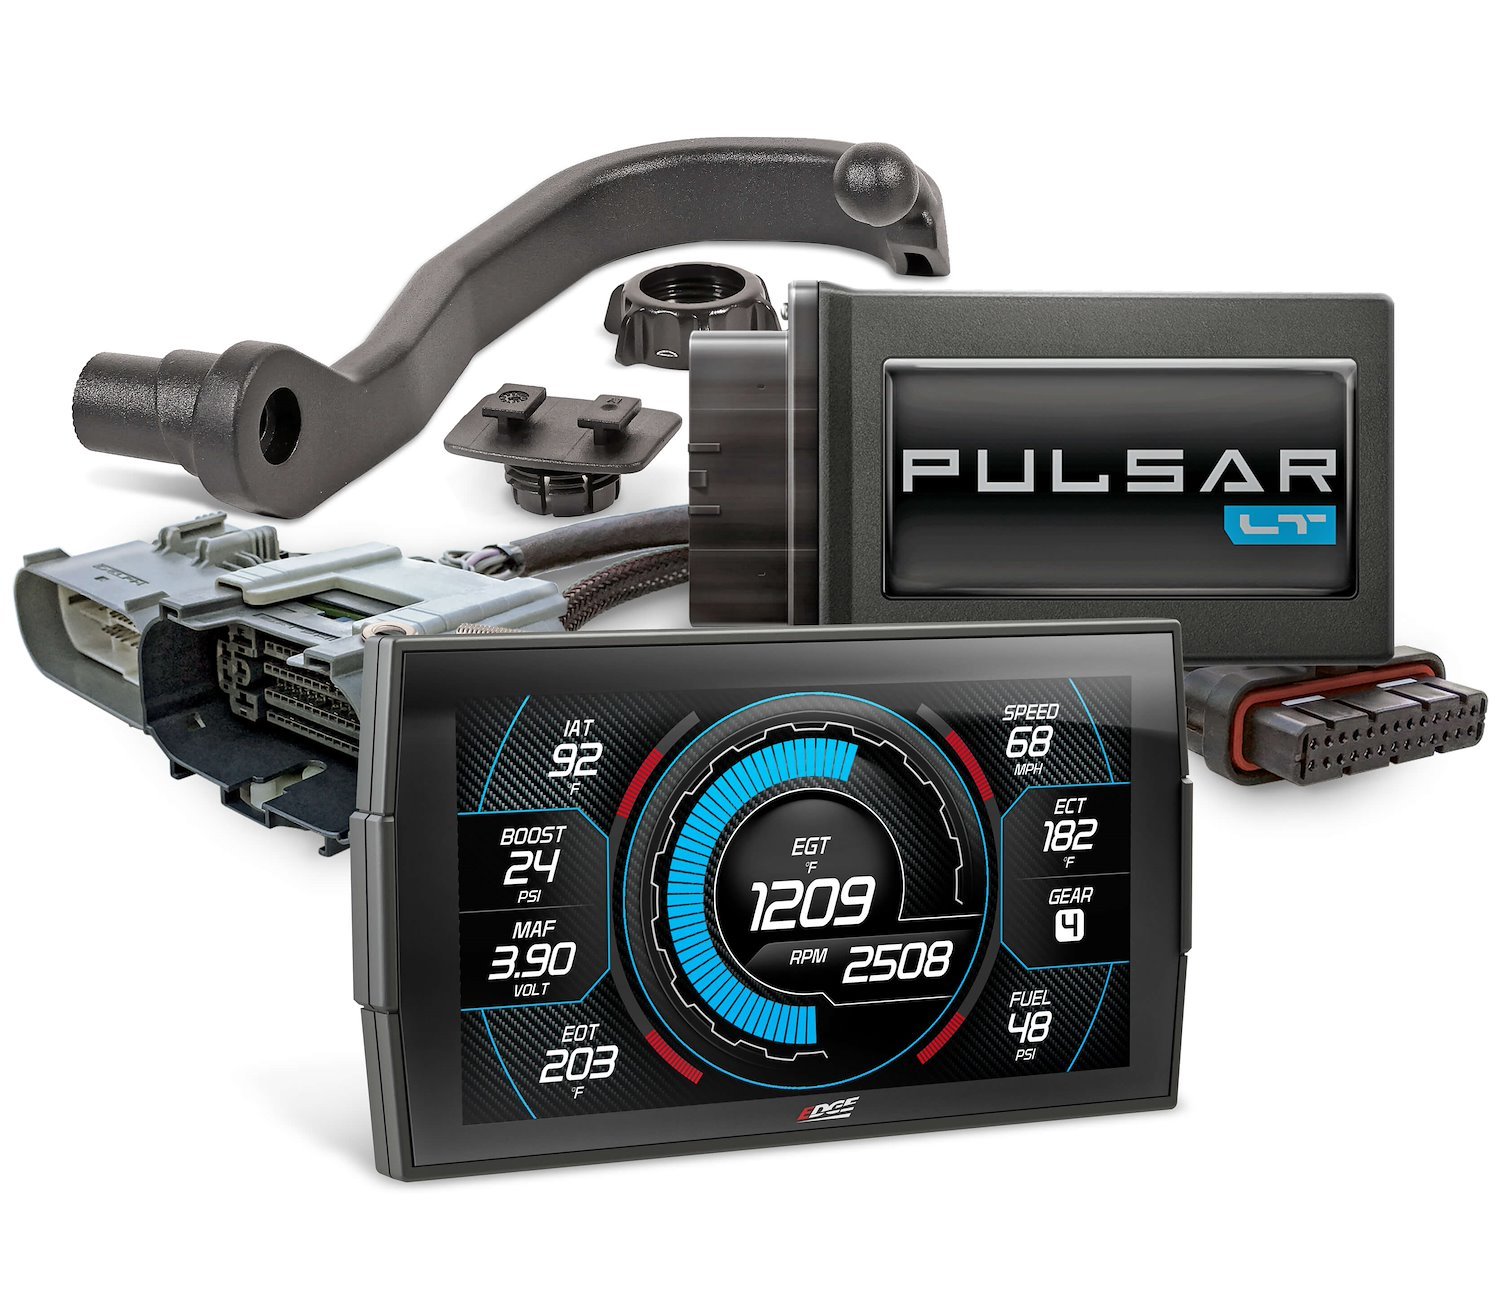 Pulsar LT In-Line Tuning Module + Insight CTS3 Monitor Kit for Late-Model Chevy Silverado, GMC Sierra 1500 5.3L/6.2L V8